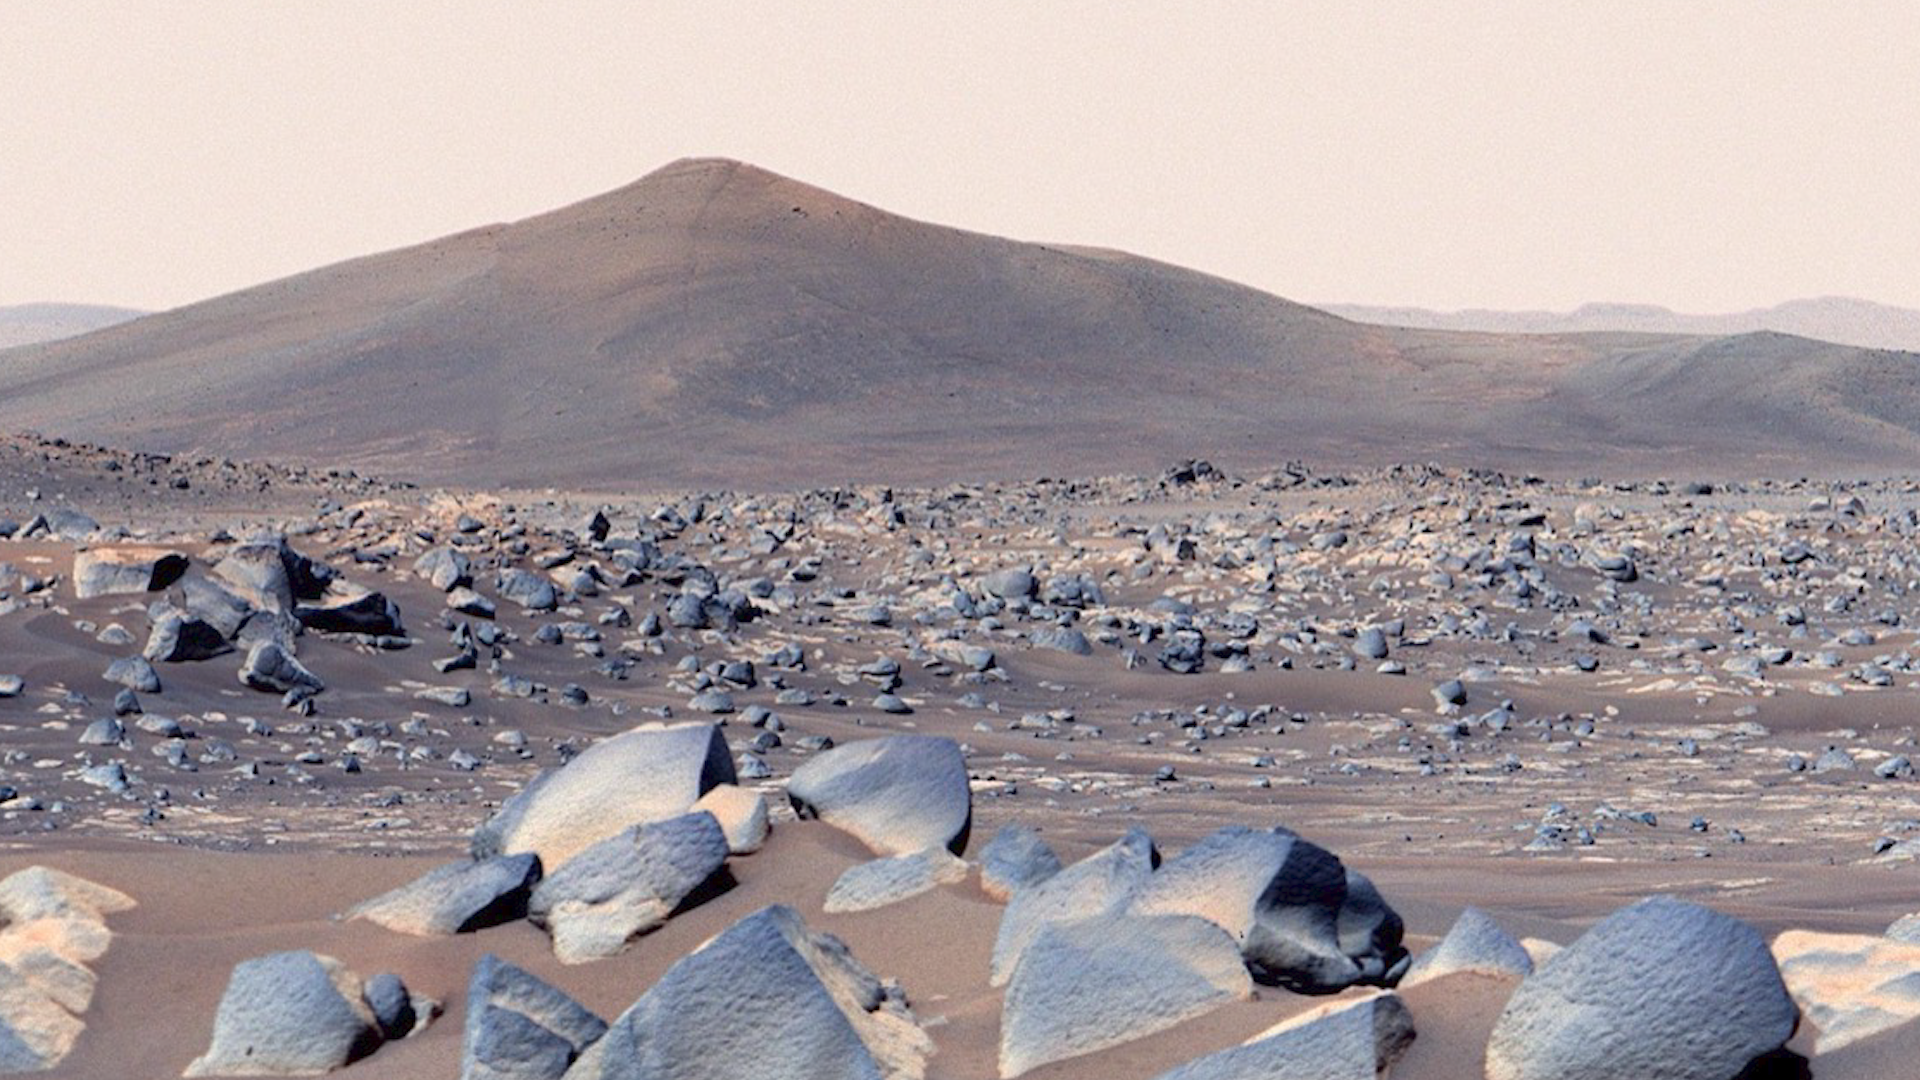 Space: New signs of life on Mars discovered by NASA’s rover